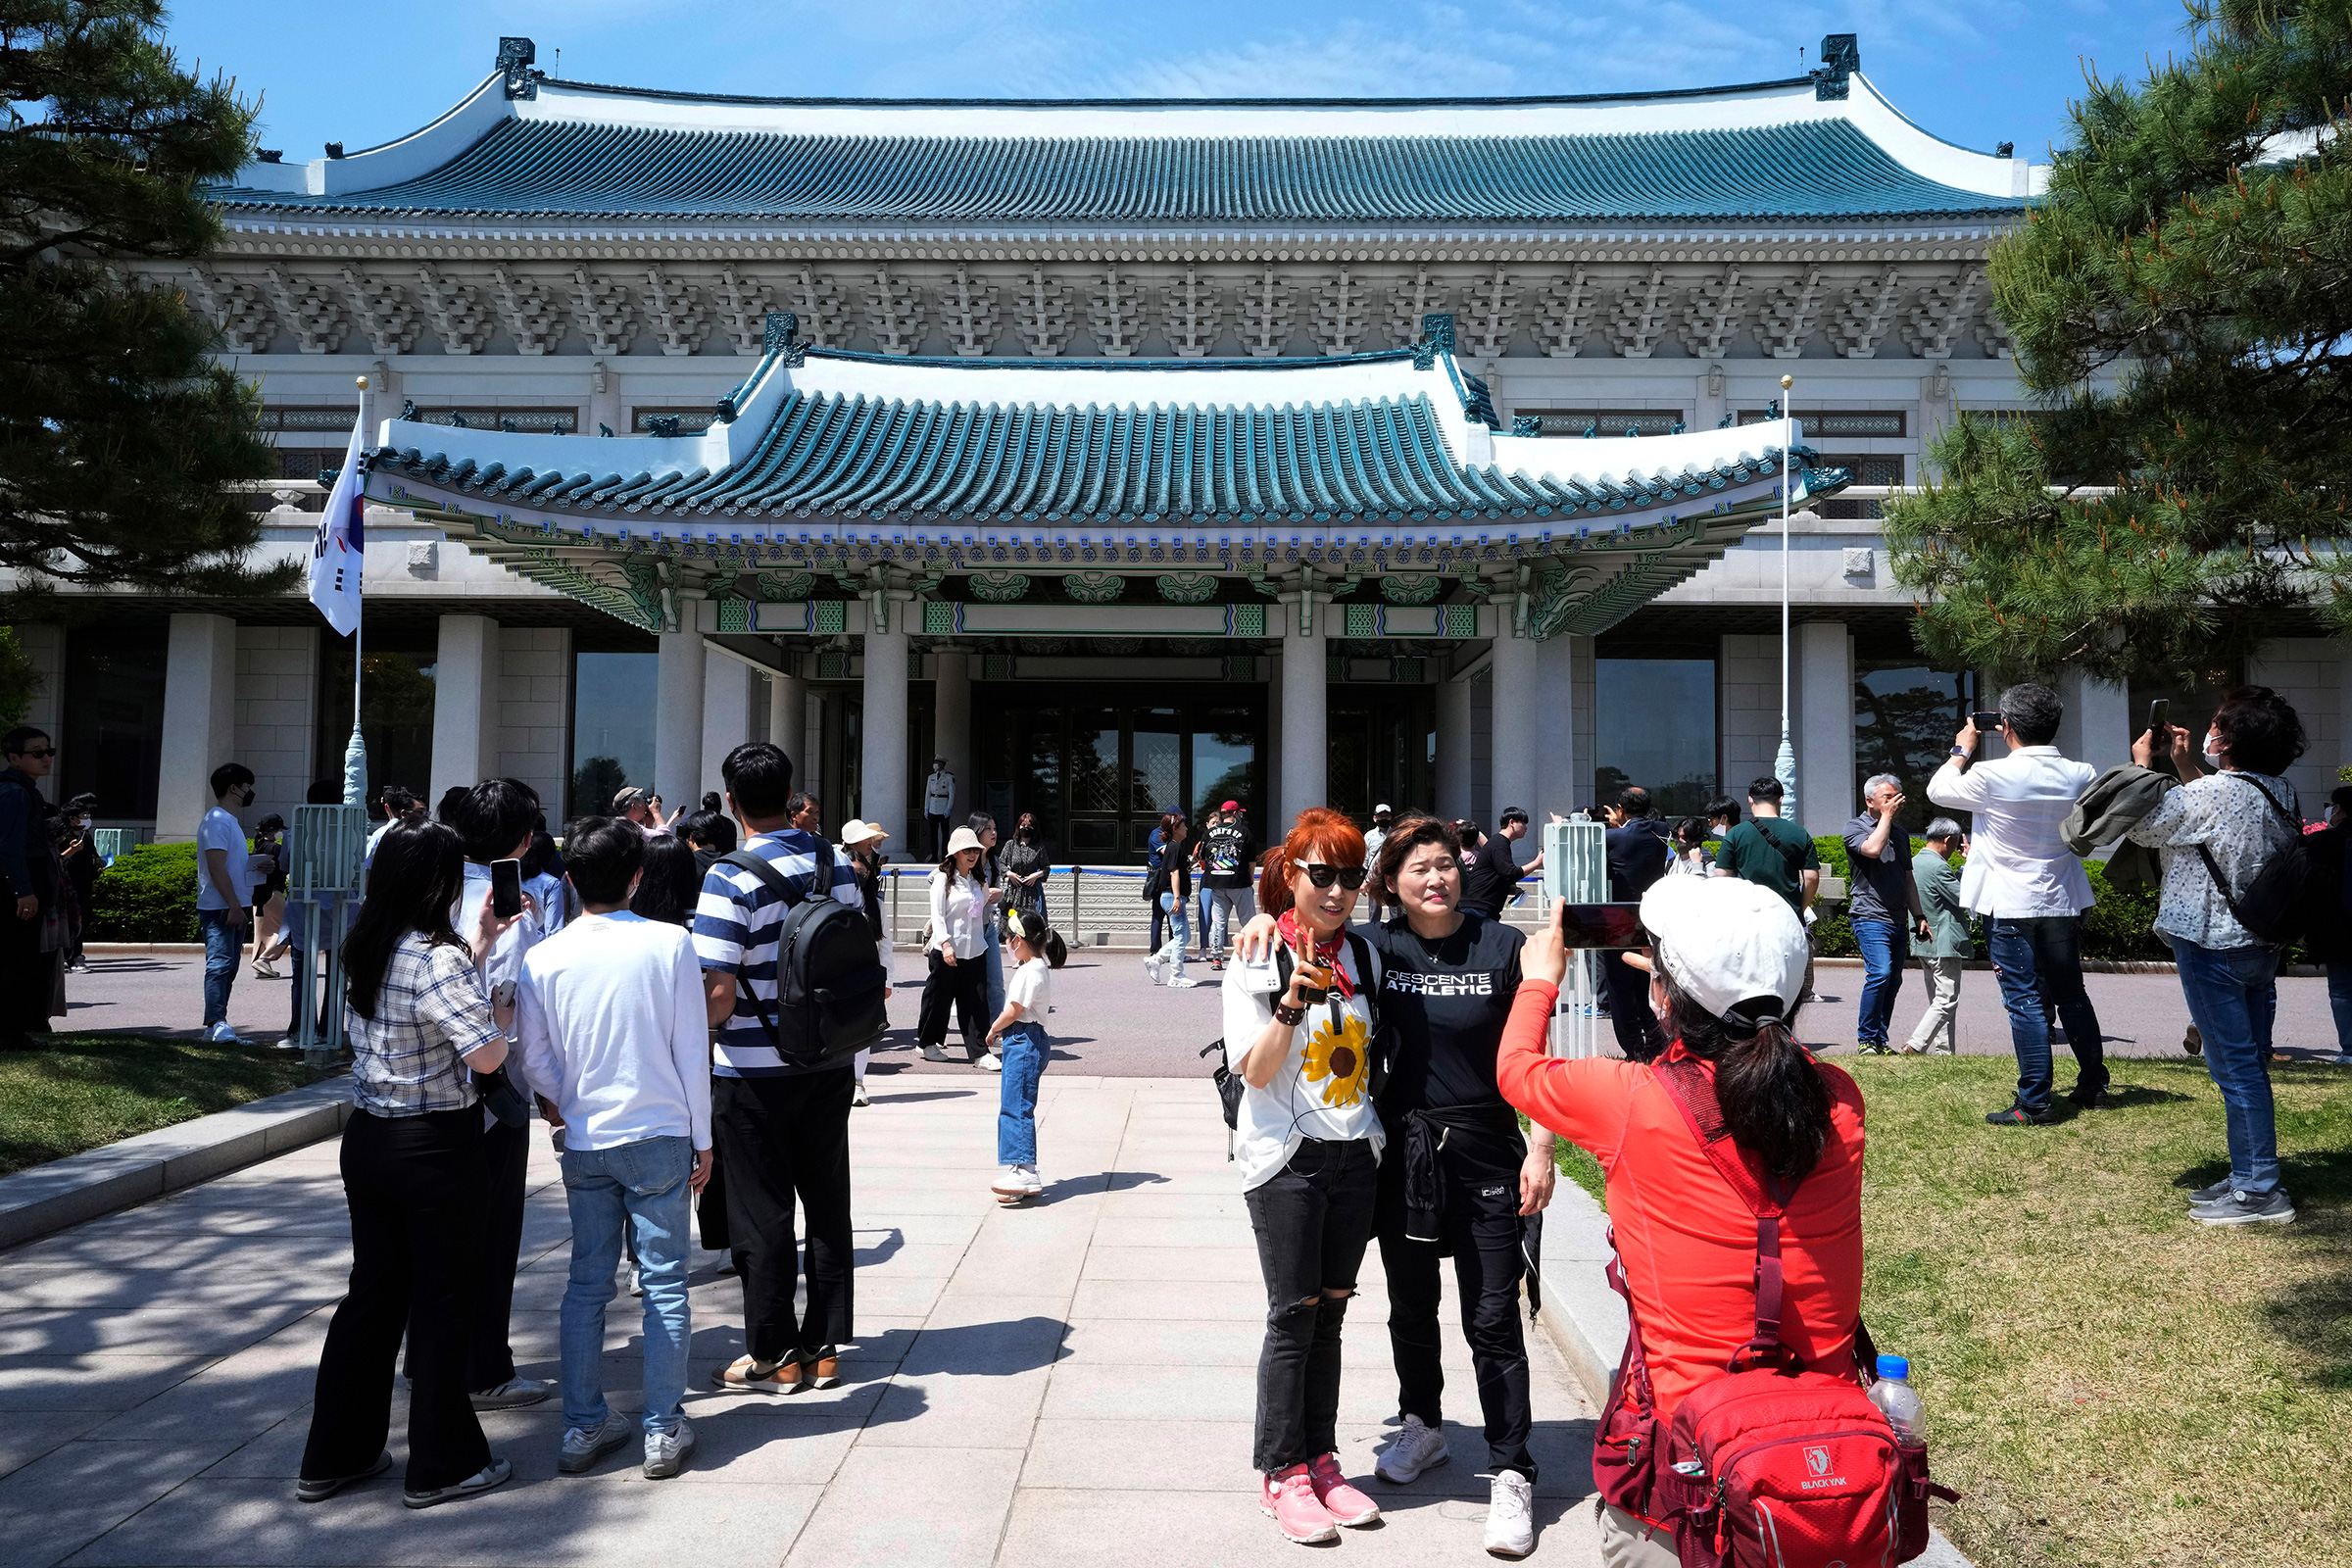 People visit the Blue House, the former presidential palace, in Seoul, May 10, 2022. For most South Koreans, the former presidential palace in Seoul was shrouded in mystery. That’s now changed recently as thousands have been allowed a look inside for the first time in 74 years. (Ahn Young-joon—AP)